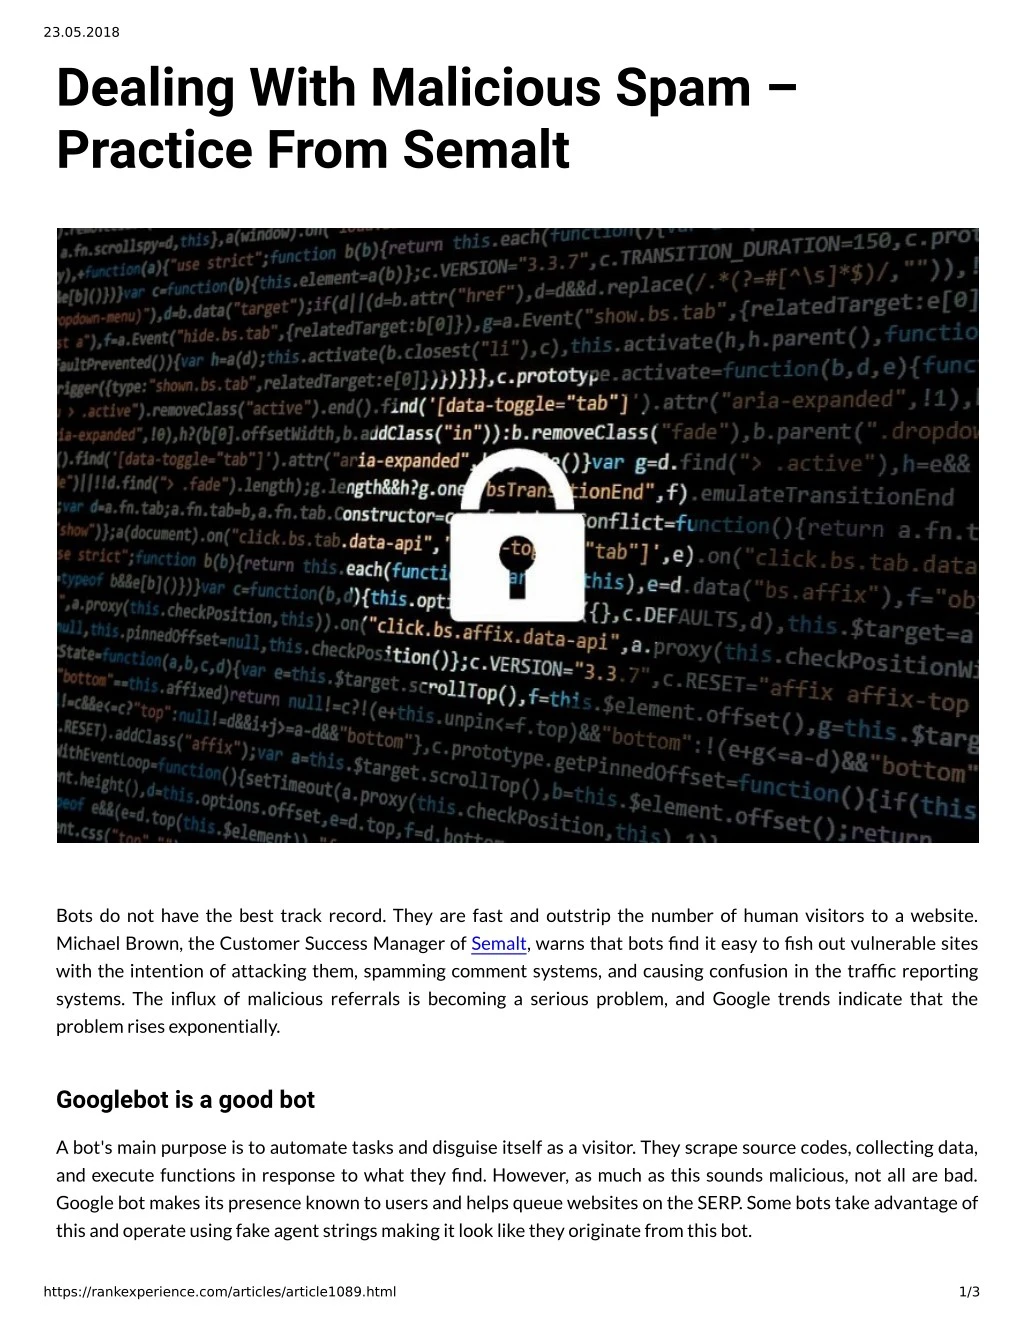 23 05 2018 dealing with malicious spam practice